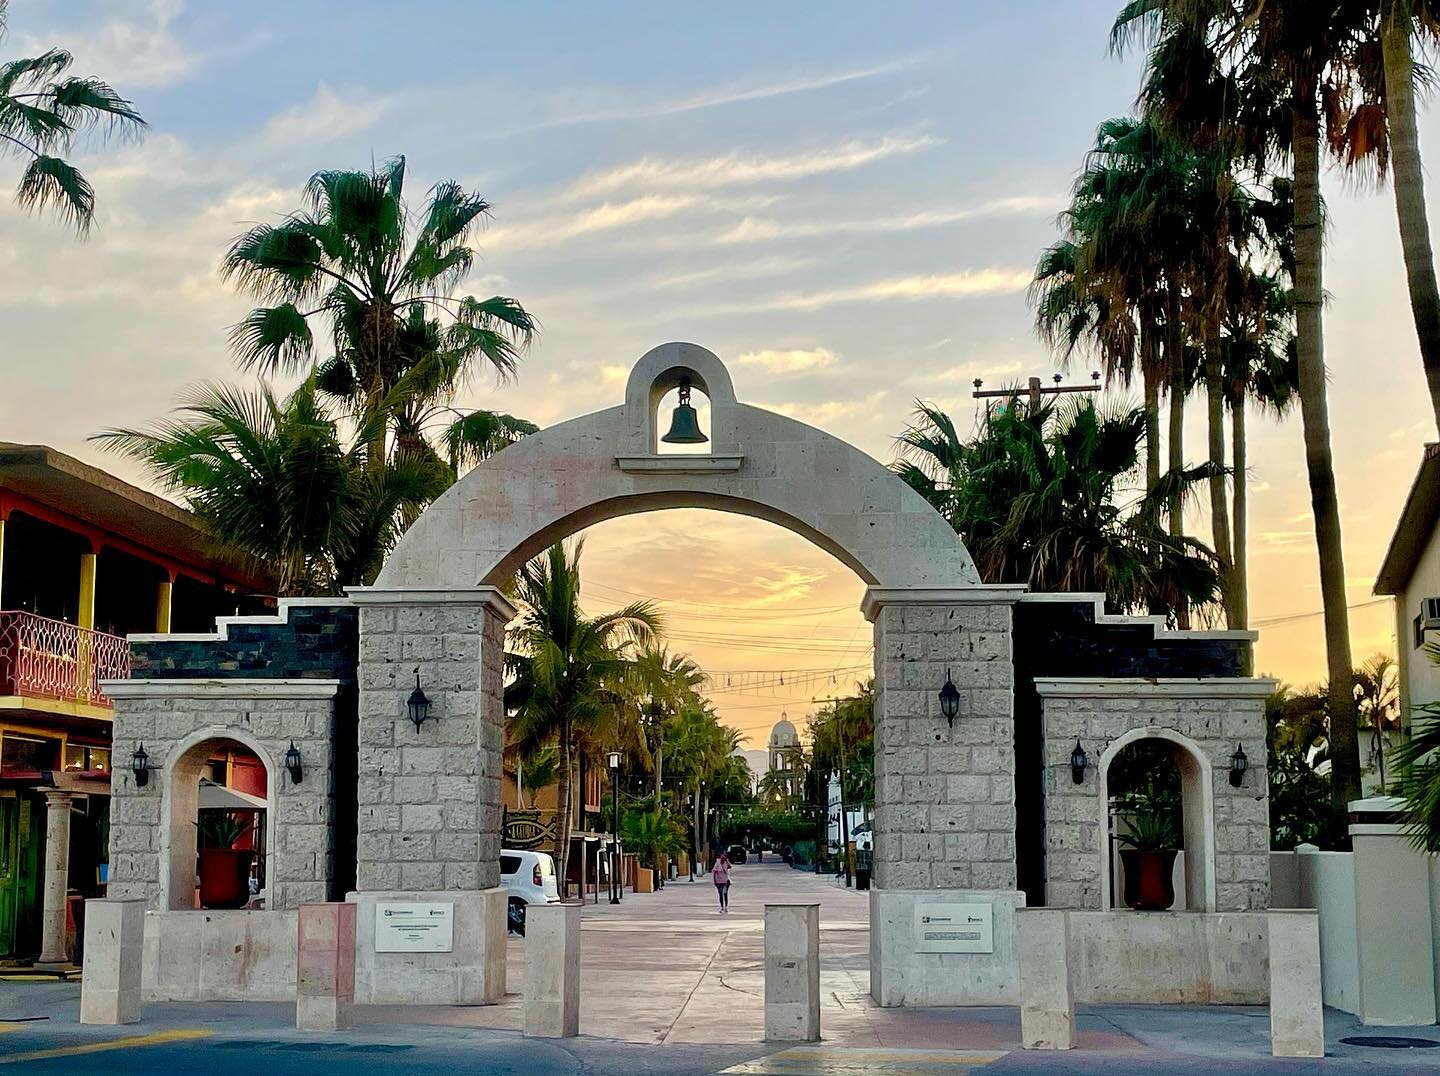 Welcome to Loreto, Mexico! This little town on the Sea of Cortez in Baja California Sur was the first settlement in California with a mission dating to 1697 and is the gateway to Loreto Bay National Marine Sanctuary. Never heard of it? Me neither! So